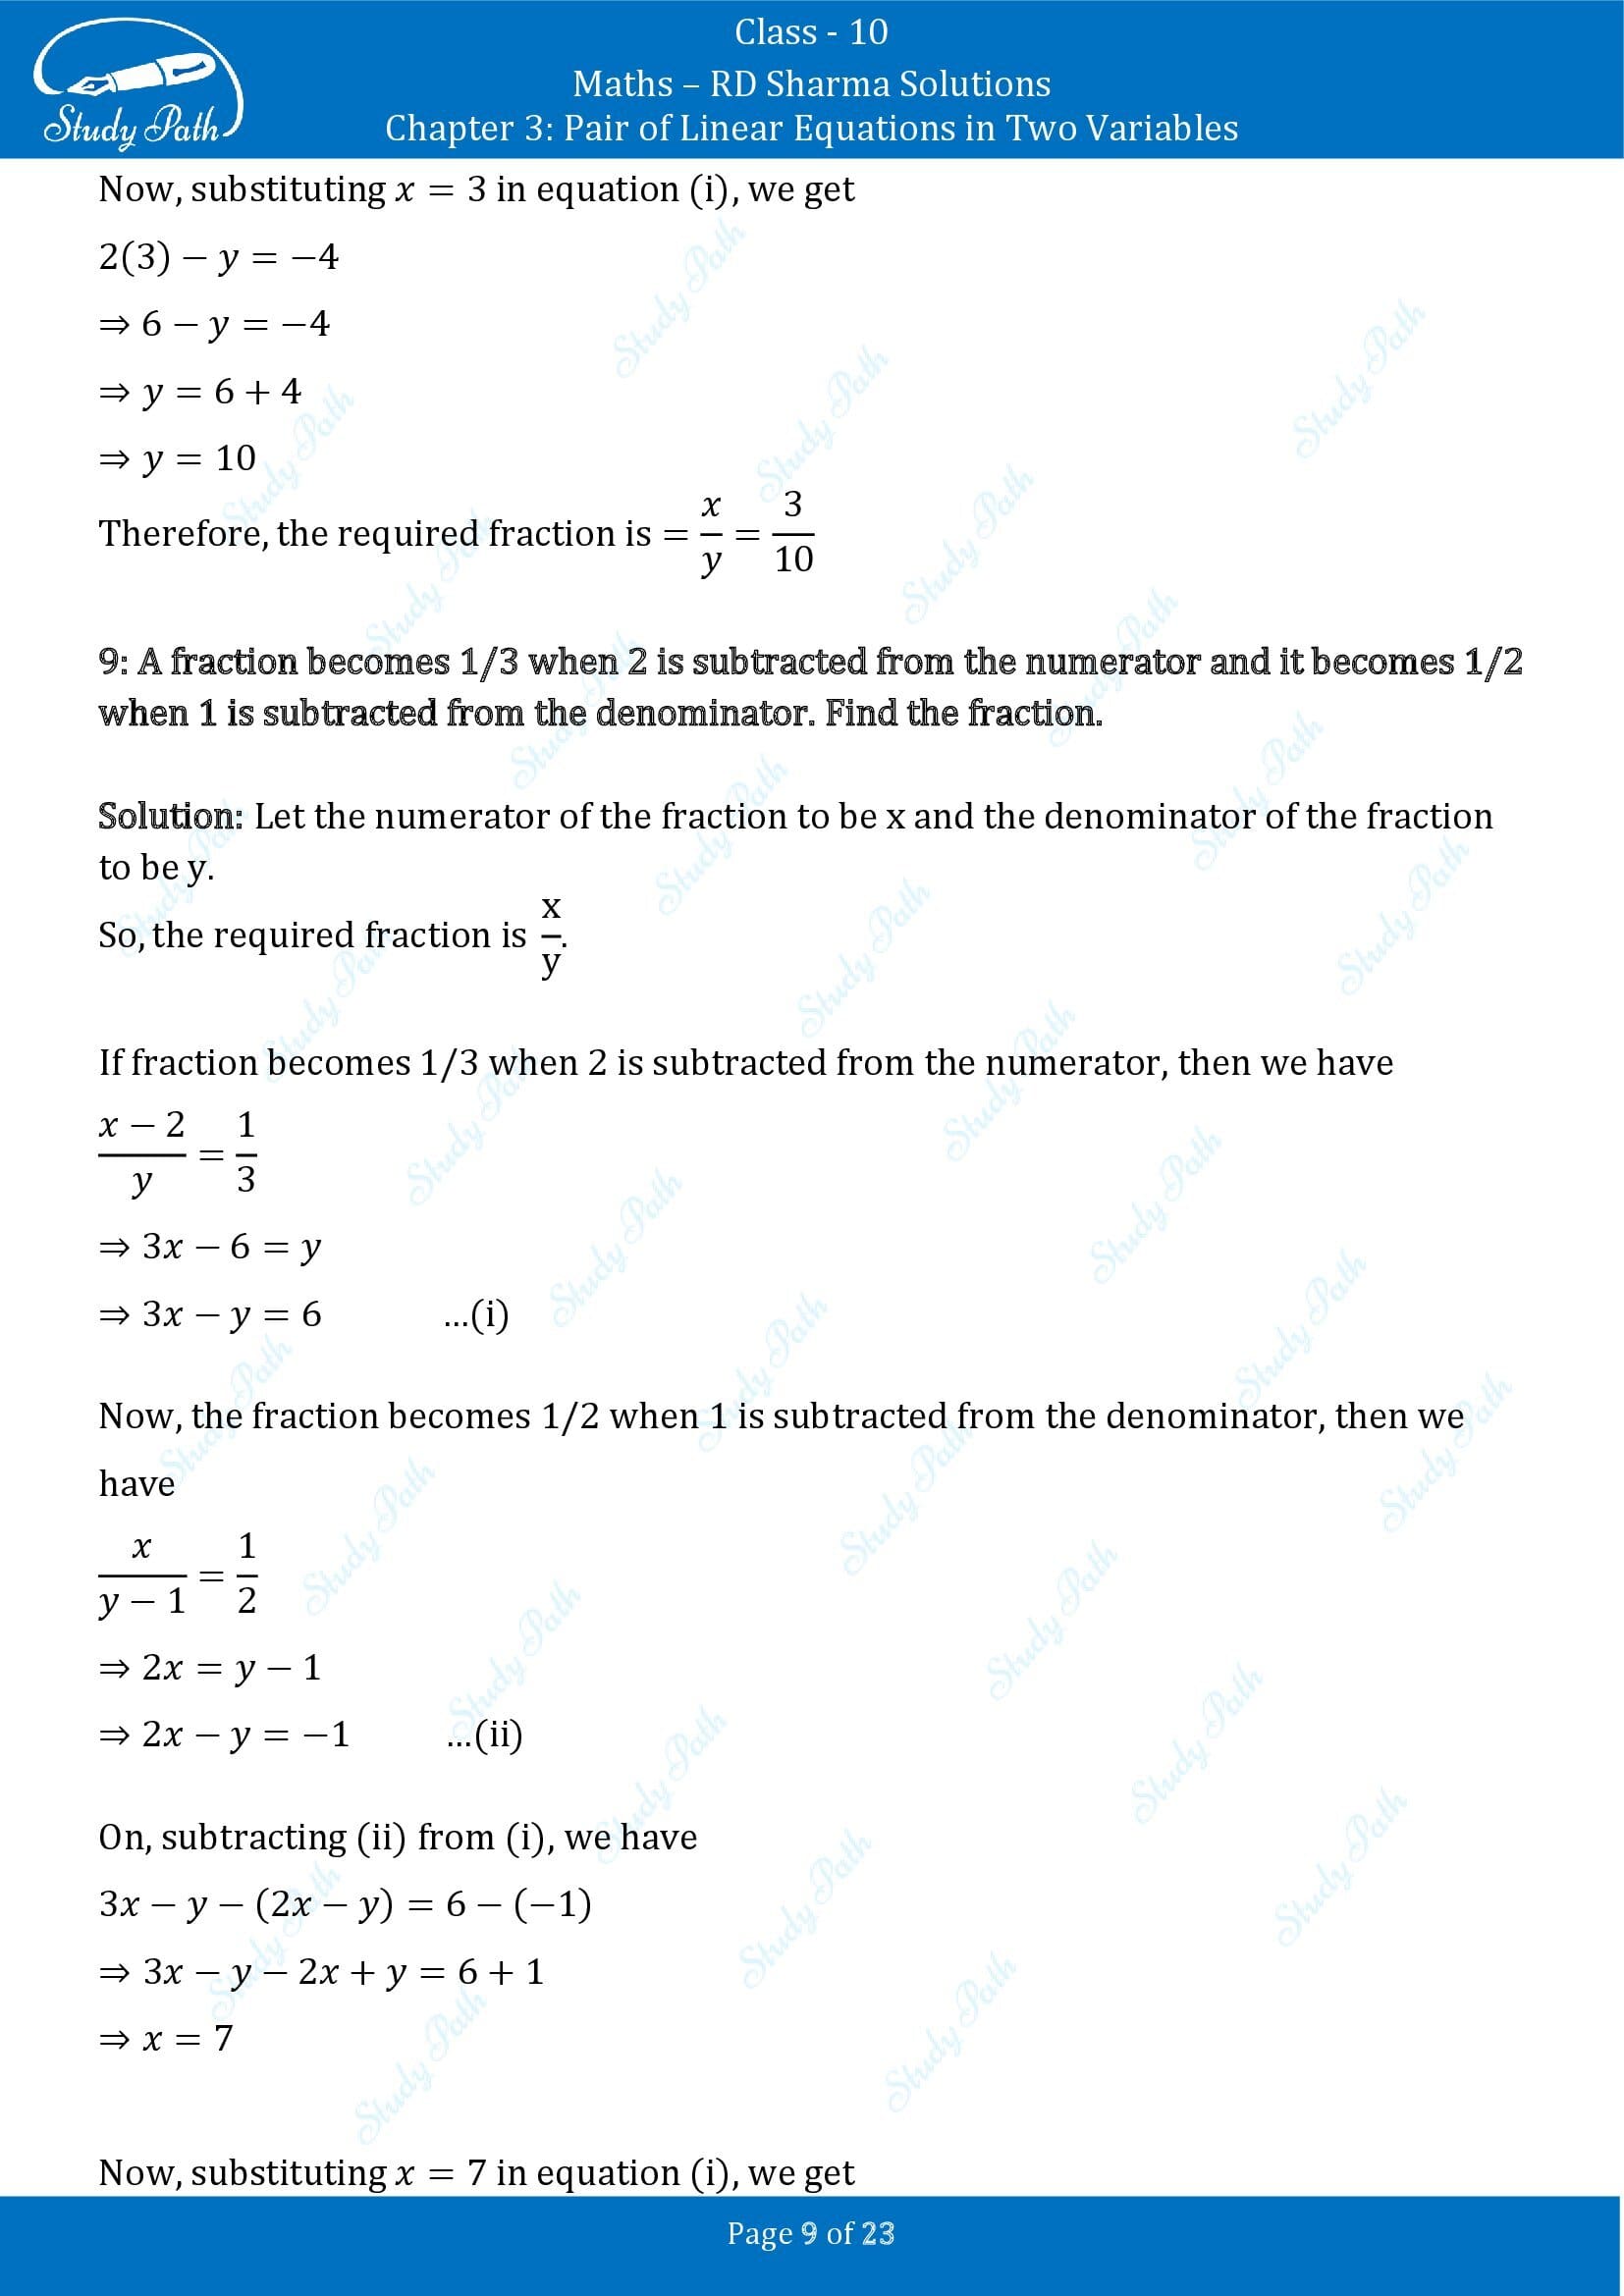 RD Sharma Solutions Class 10 Chapter 3 Pair of Linear Equations in Two Variables Exercise 3.8 00009